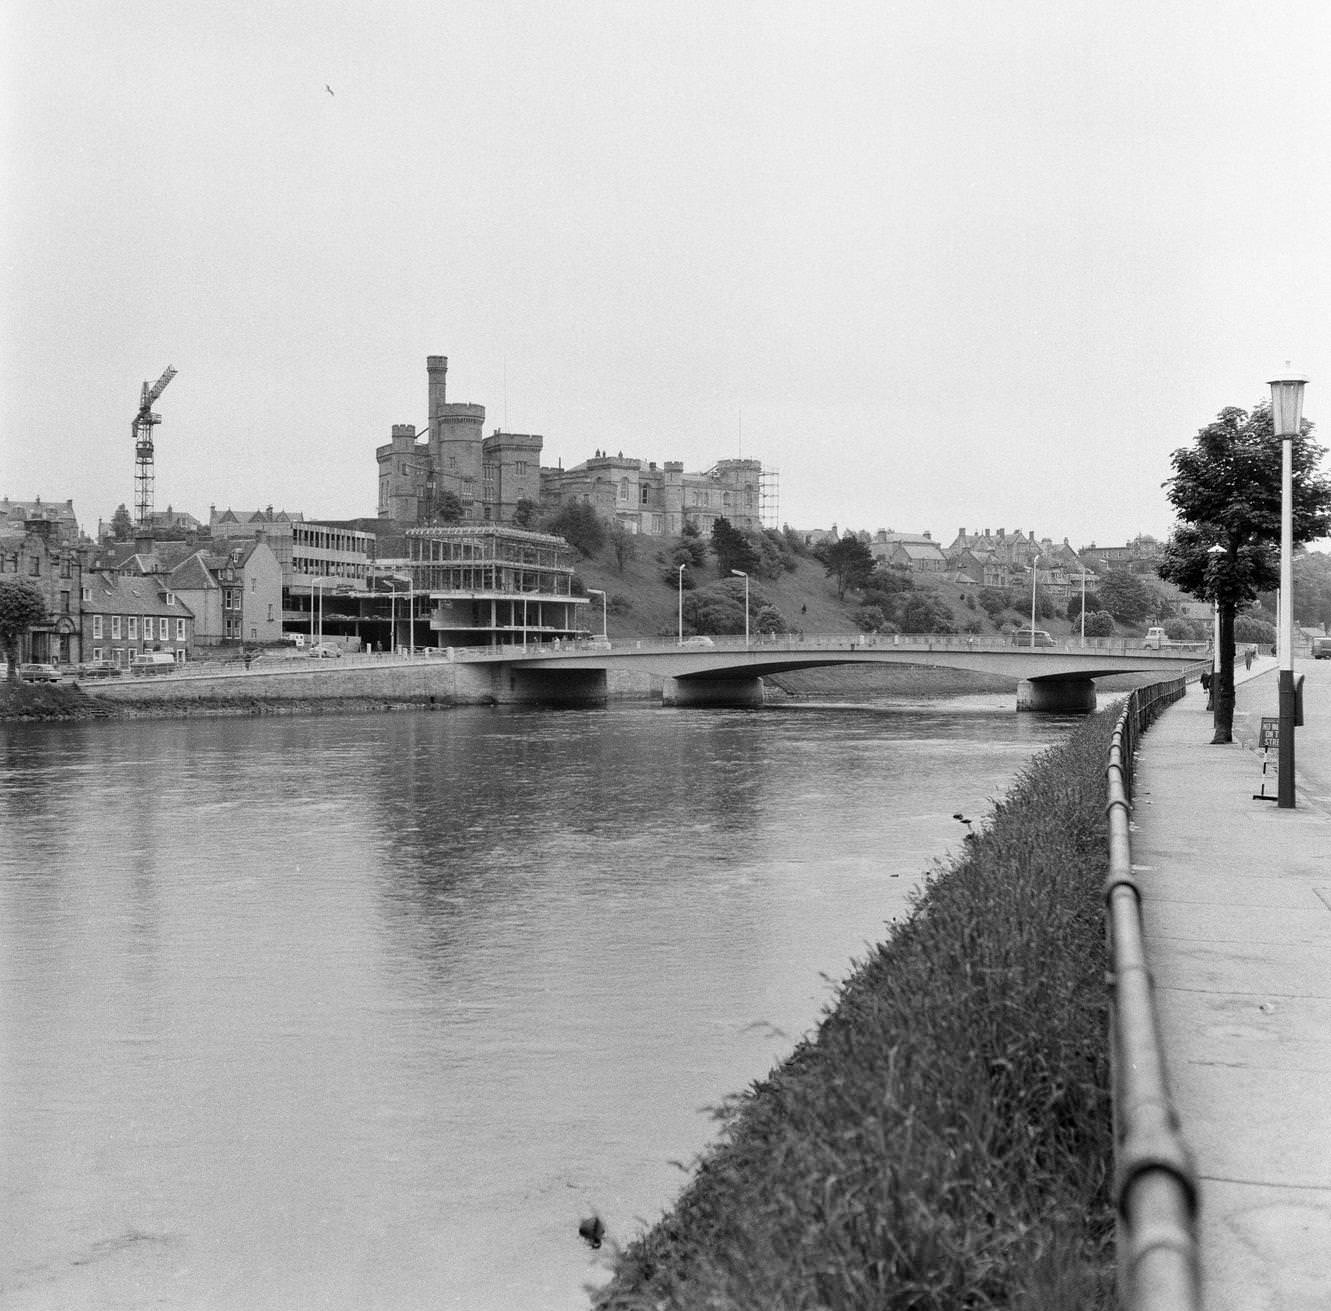 River Ness in Inverness, Inverness-shire, 17th June 1964.